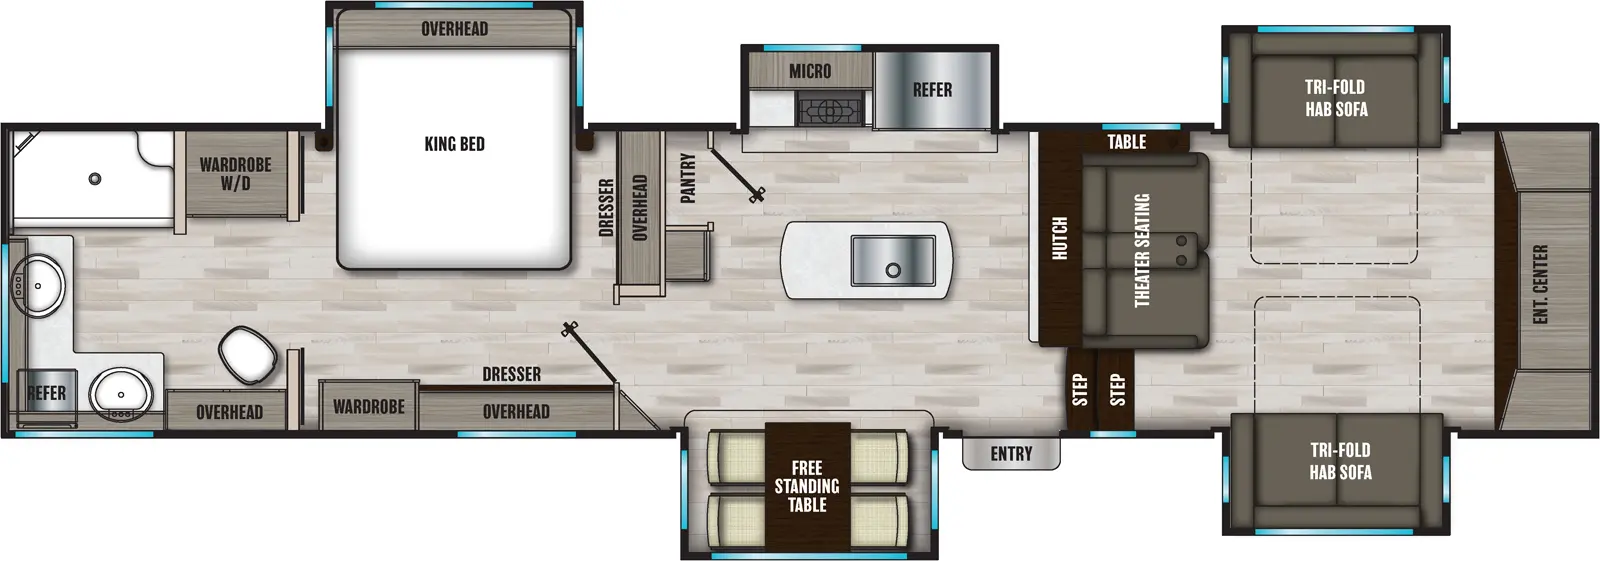 The 334FL has five slideouts and one entry. Exterior features a rear small refrigerator. Interior layout front to back: front living room with front entertainment center with theater seat and table opposite, and opposing tri-fold hide-a-bed sofa slide outs; two steps down into the kitchen and entry with door side free-standing table slideout, kitchen island with sink, hutch along inner wall, off-door side slideout with refrigerator, microwave, and kitchen counter, and pantry along inner wall opposite hutch; bedroom with dresser and overhead cabinet along inner wall, off-door side king bed slideout with overhead cabinet, and door side dresser with overhead cabinet and wardrobe; rear full bathroom with wardrobe washer/dryer and dual sinks.